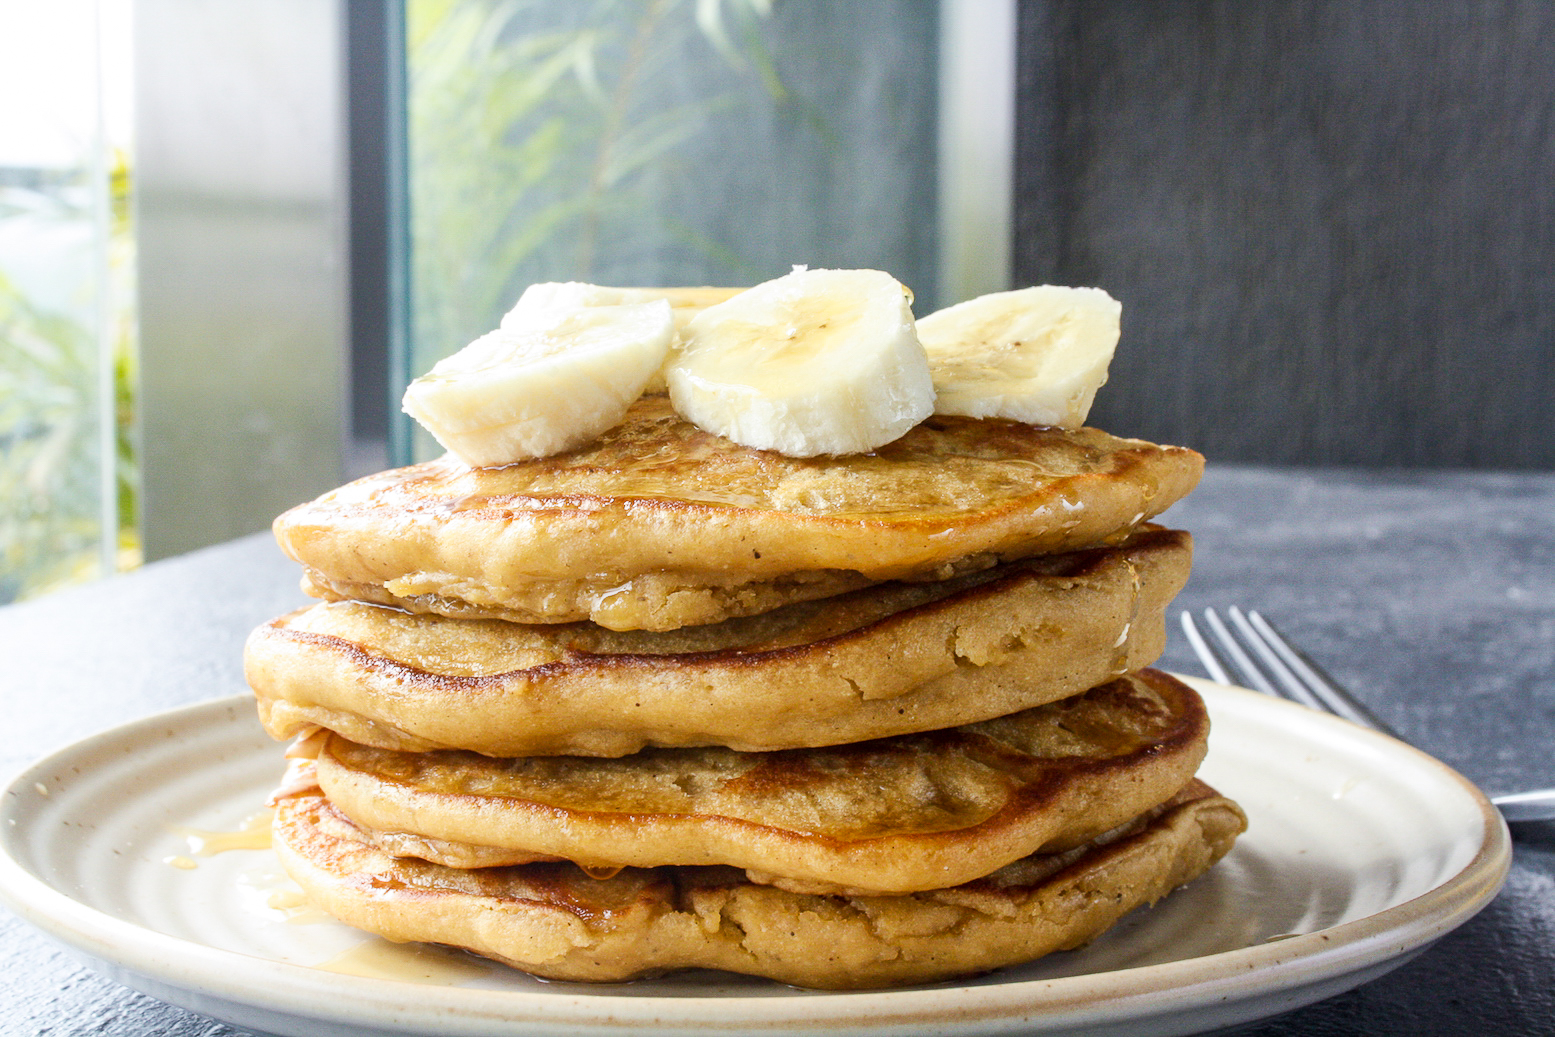 Super easy, soft and fluffy cornmeal pancakes!